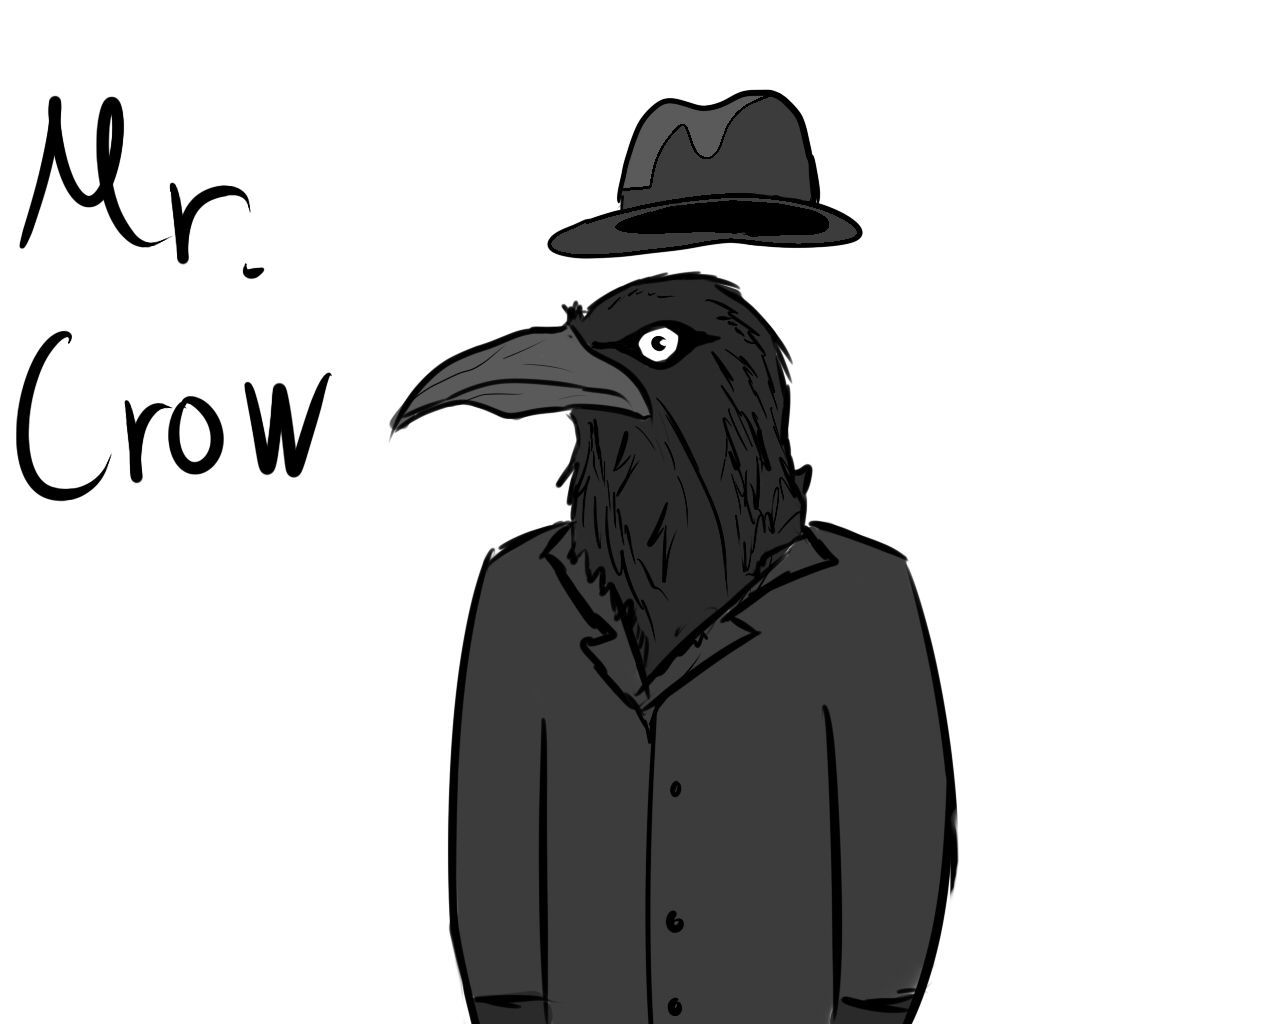 mr. crow from cube escape rusty lake .ch